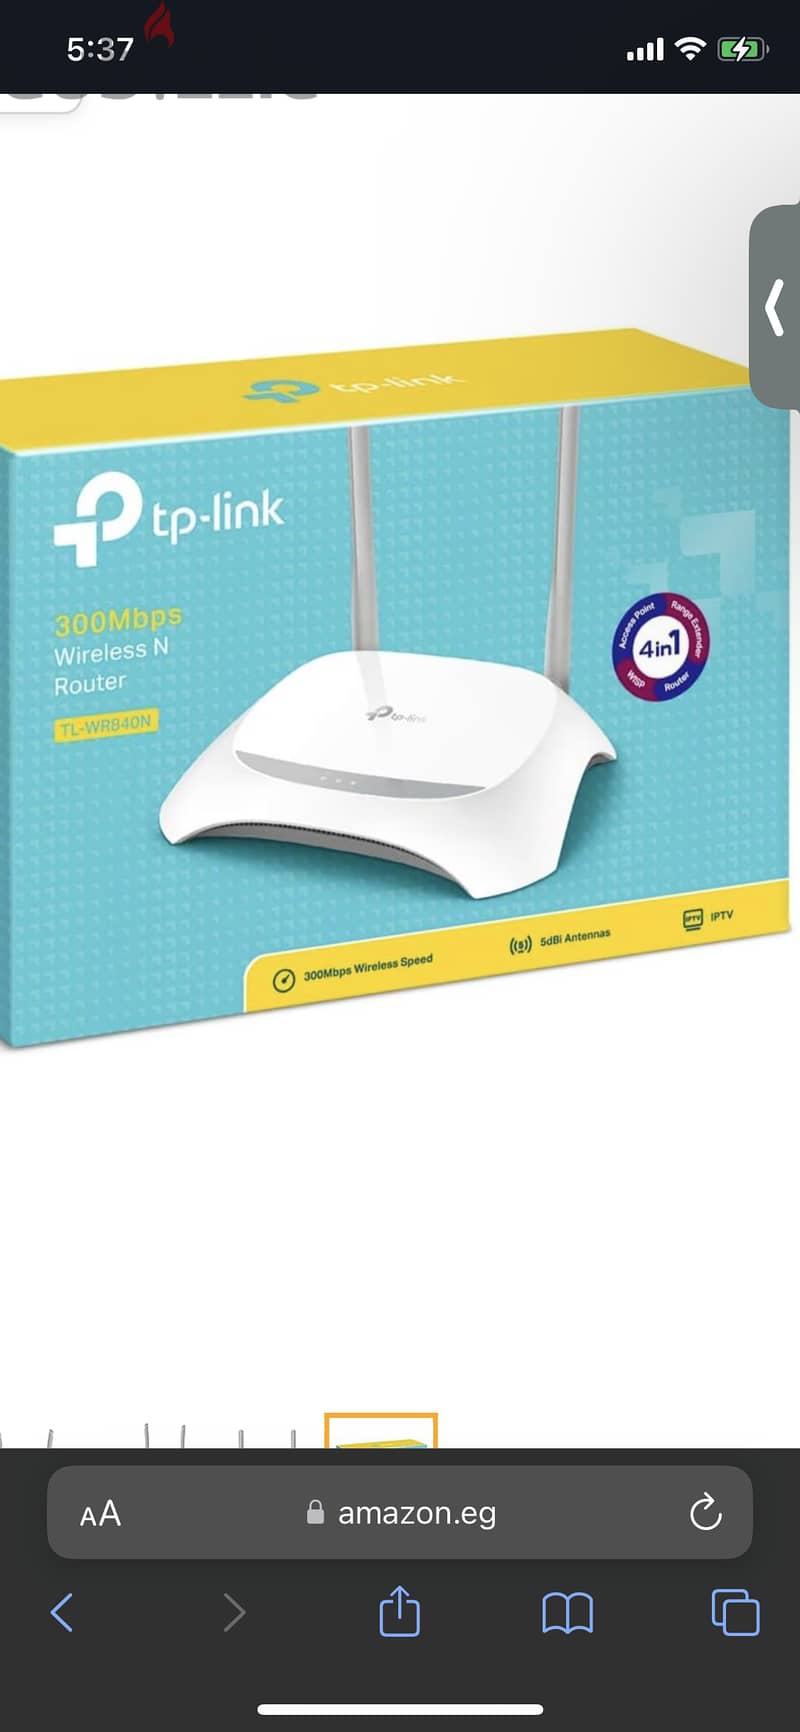 TP-LINK 300mbps Wireless N Router 2